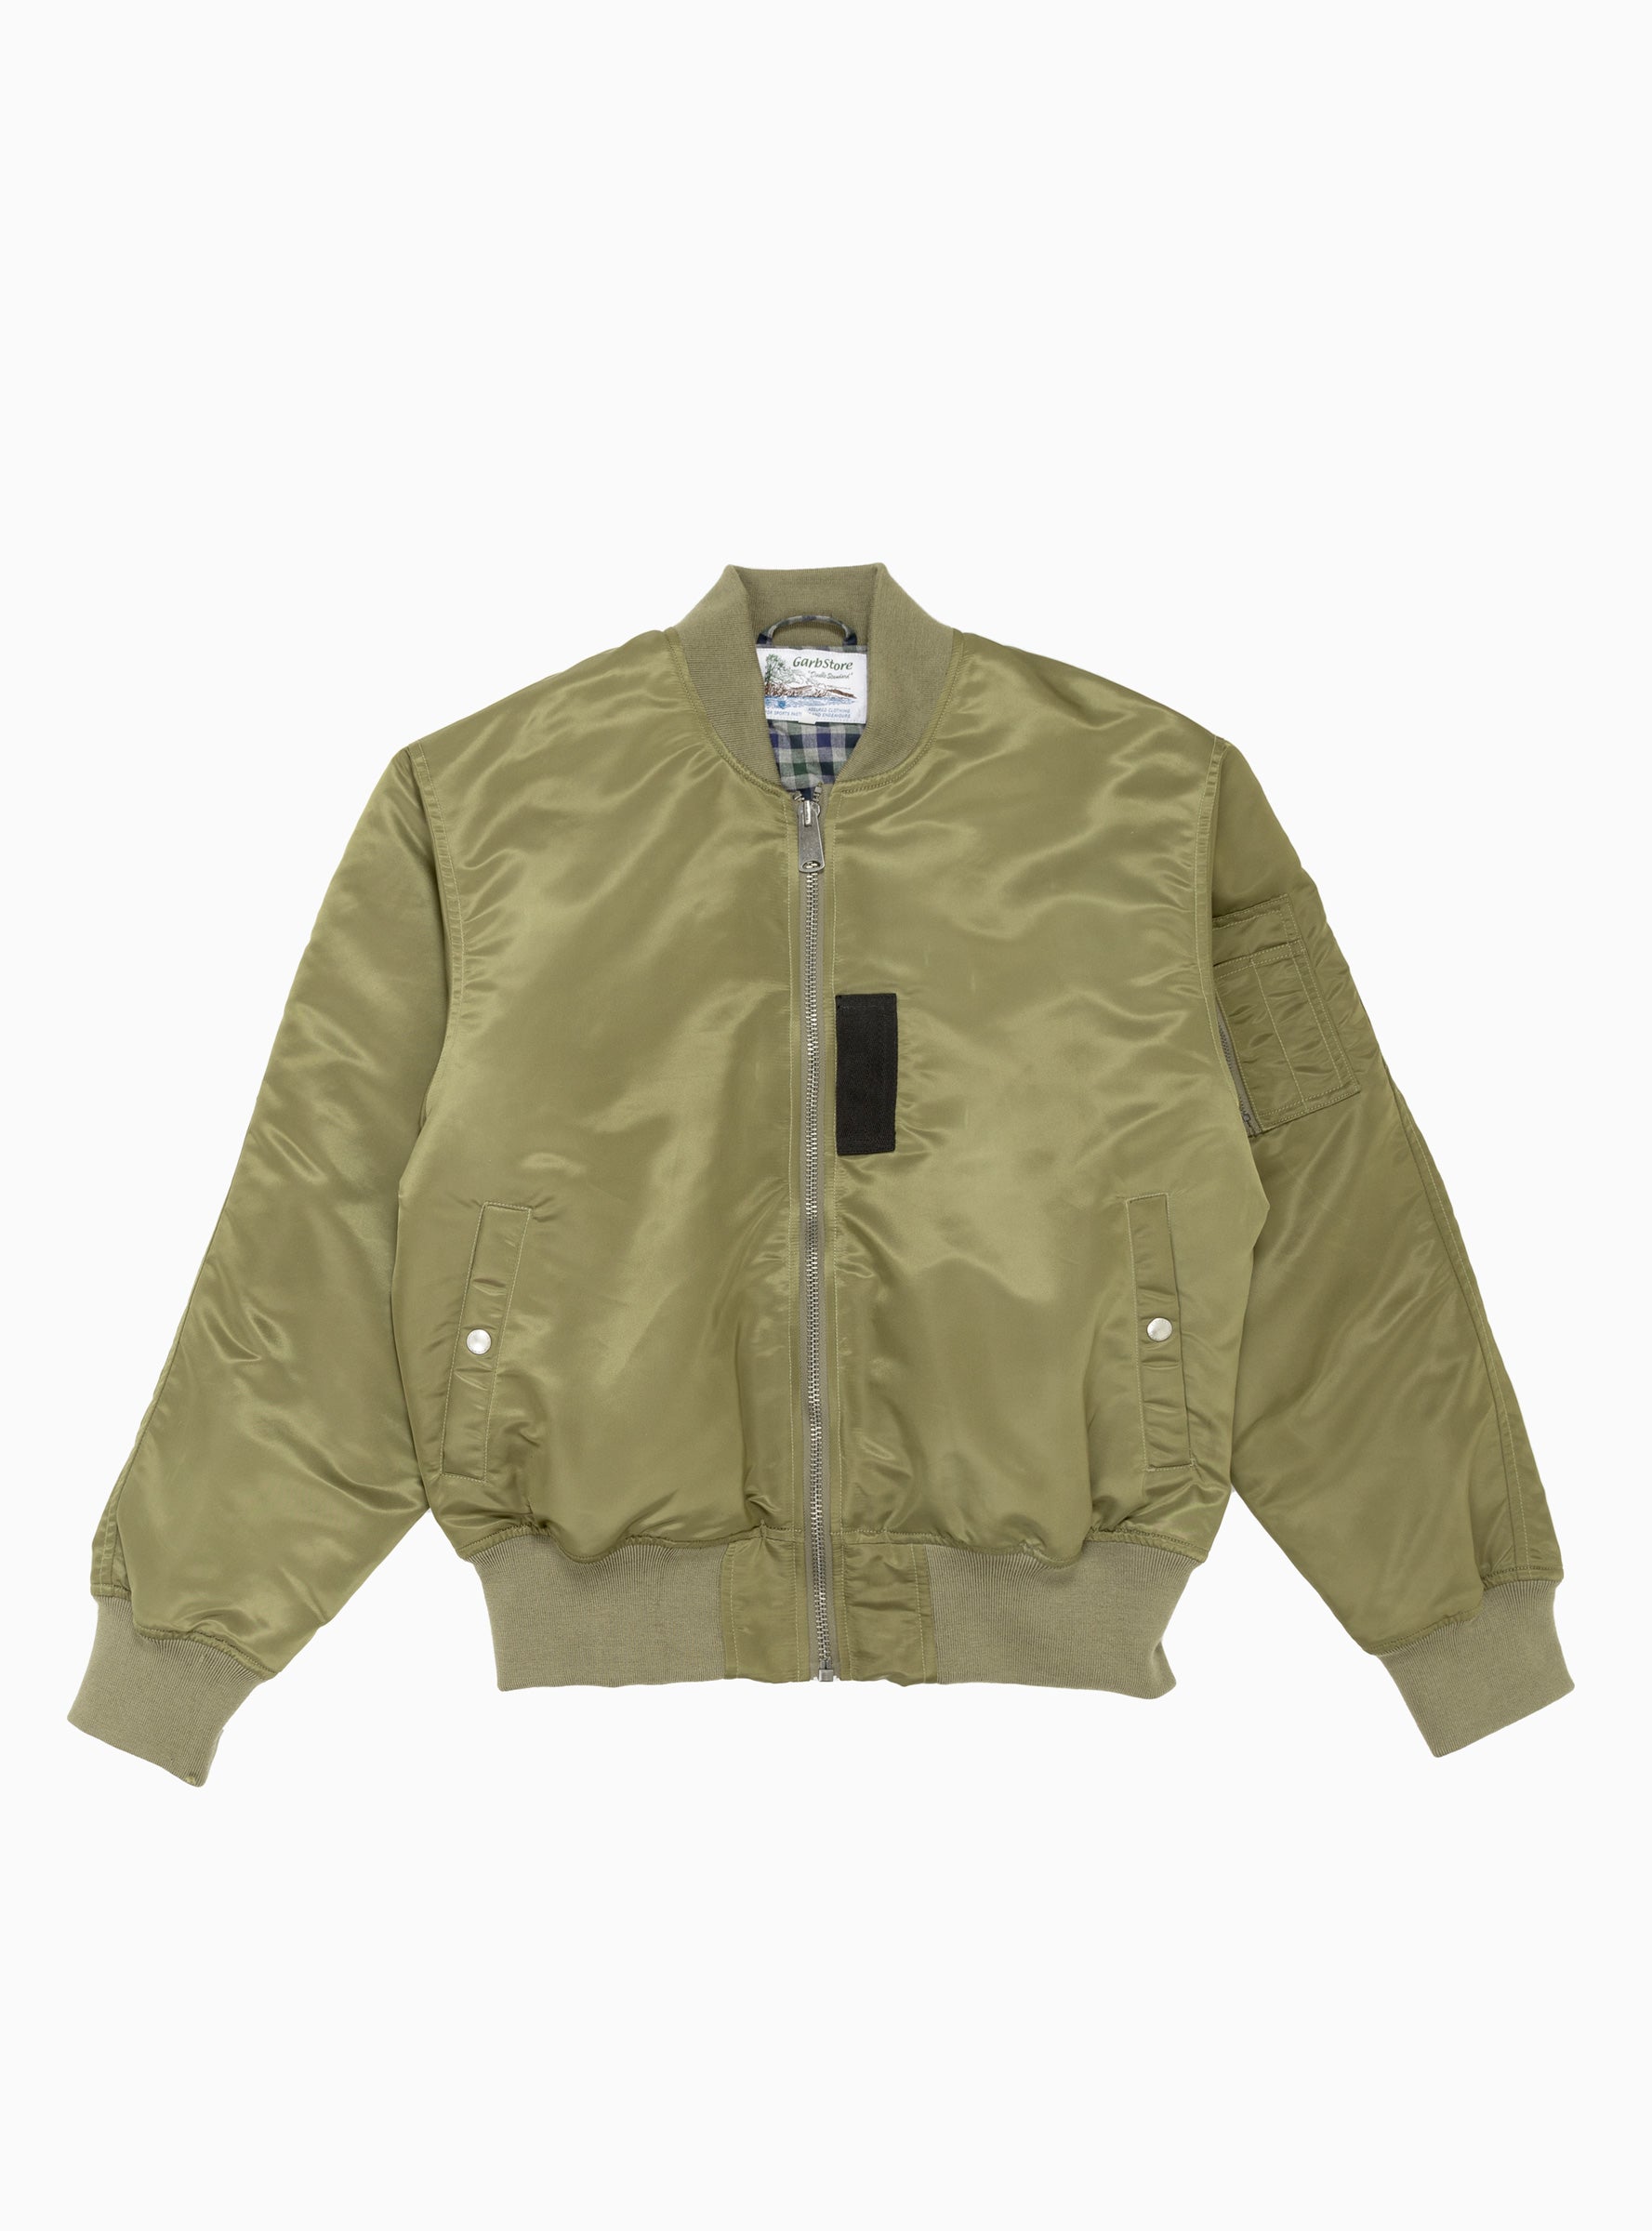 Reebok vintage bomber jacket in off-white and green - Exclusive to ASOS